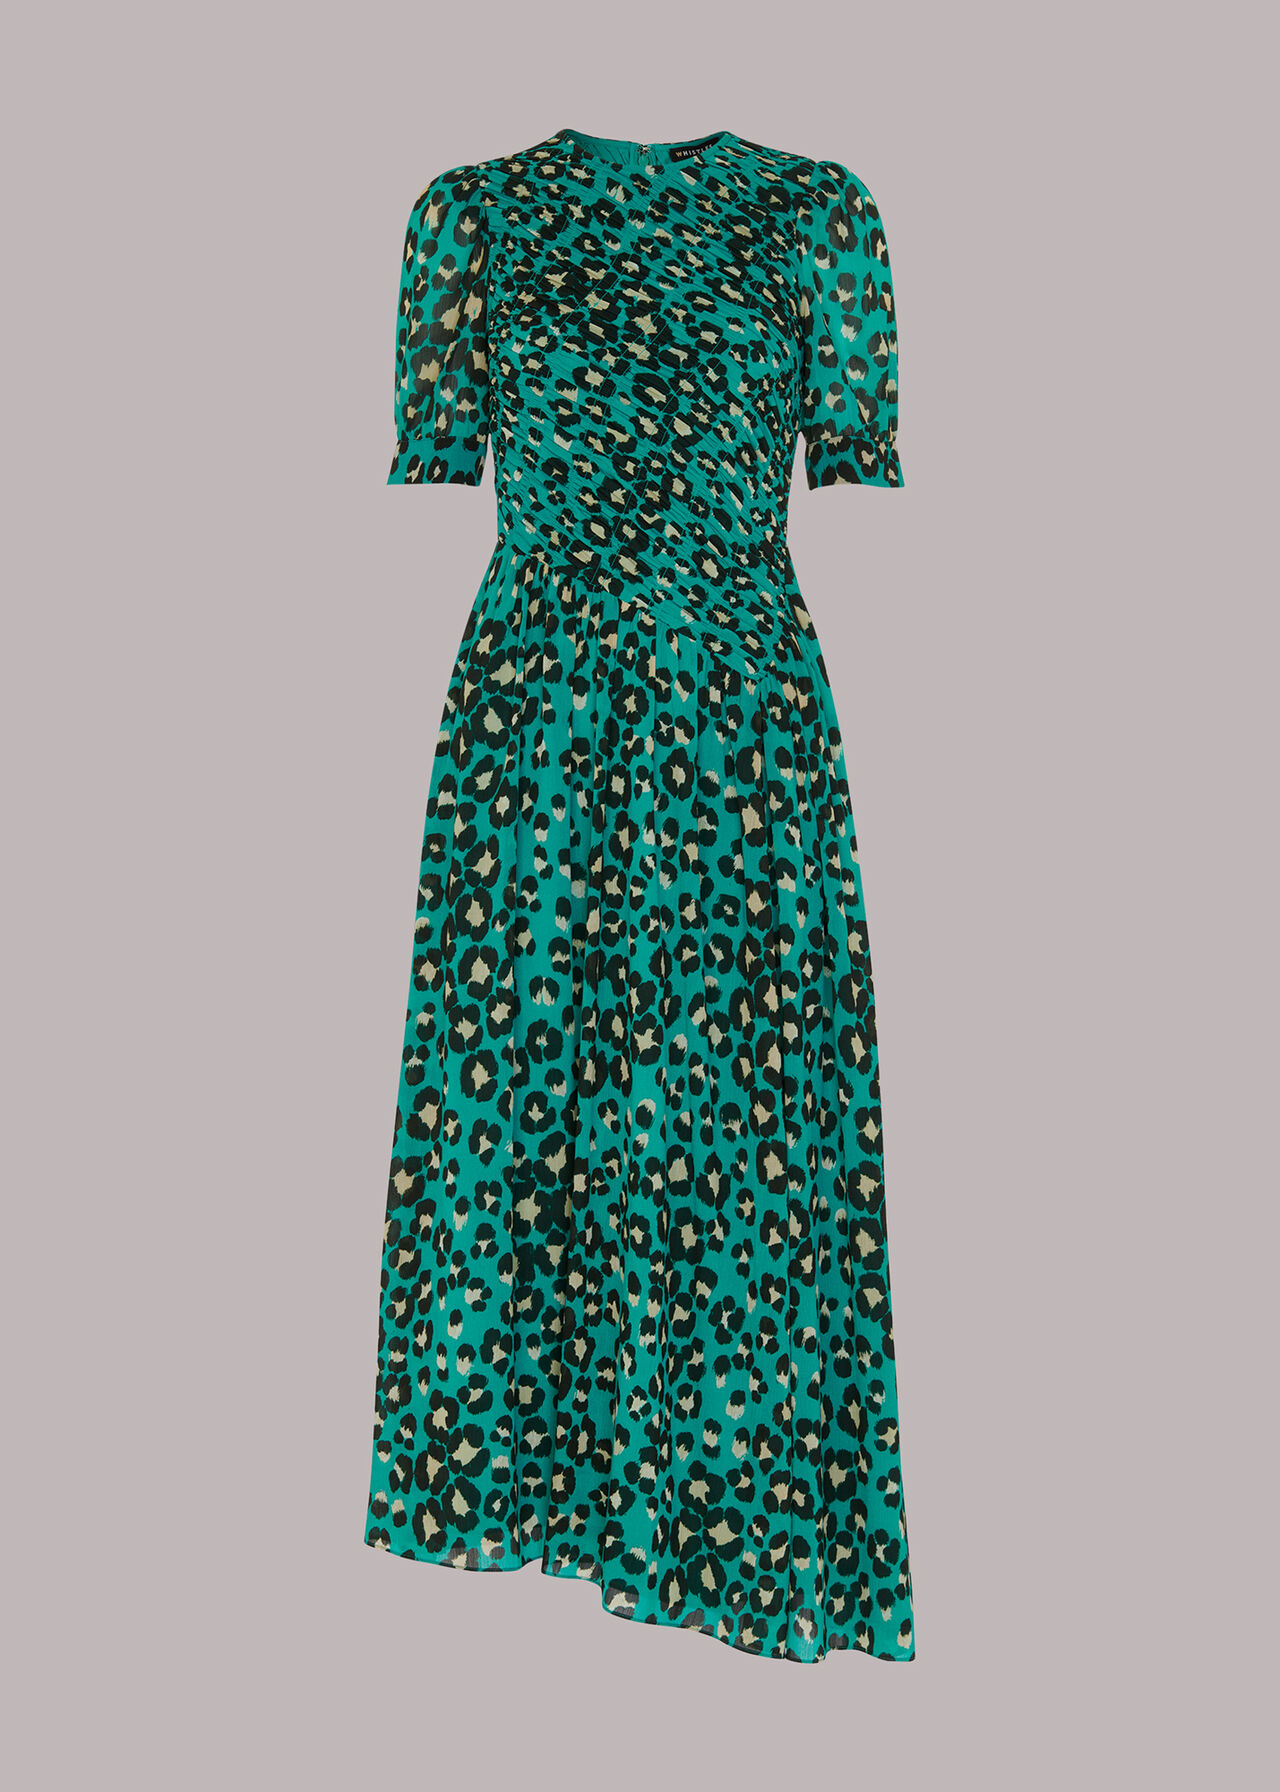 Green/Multi Painted Leopard Shirred Dress, WHISTLES